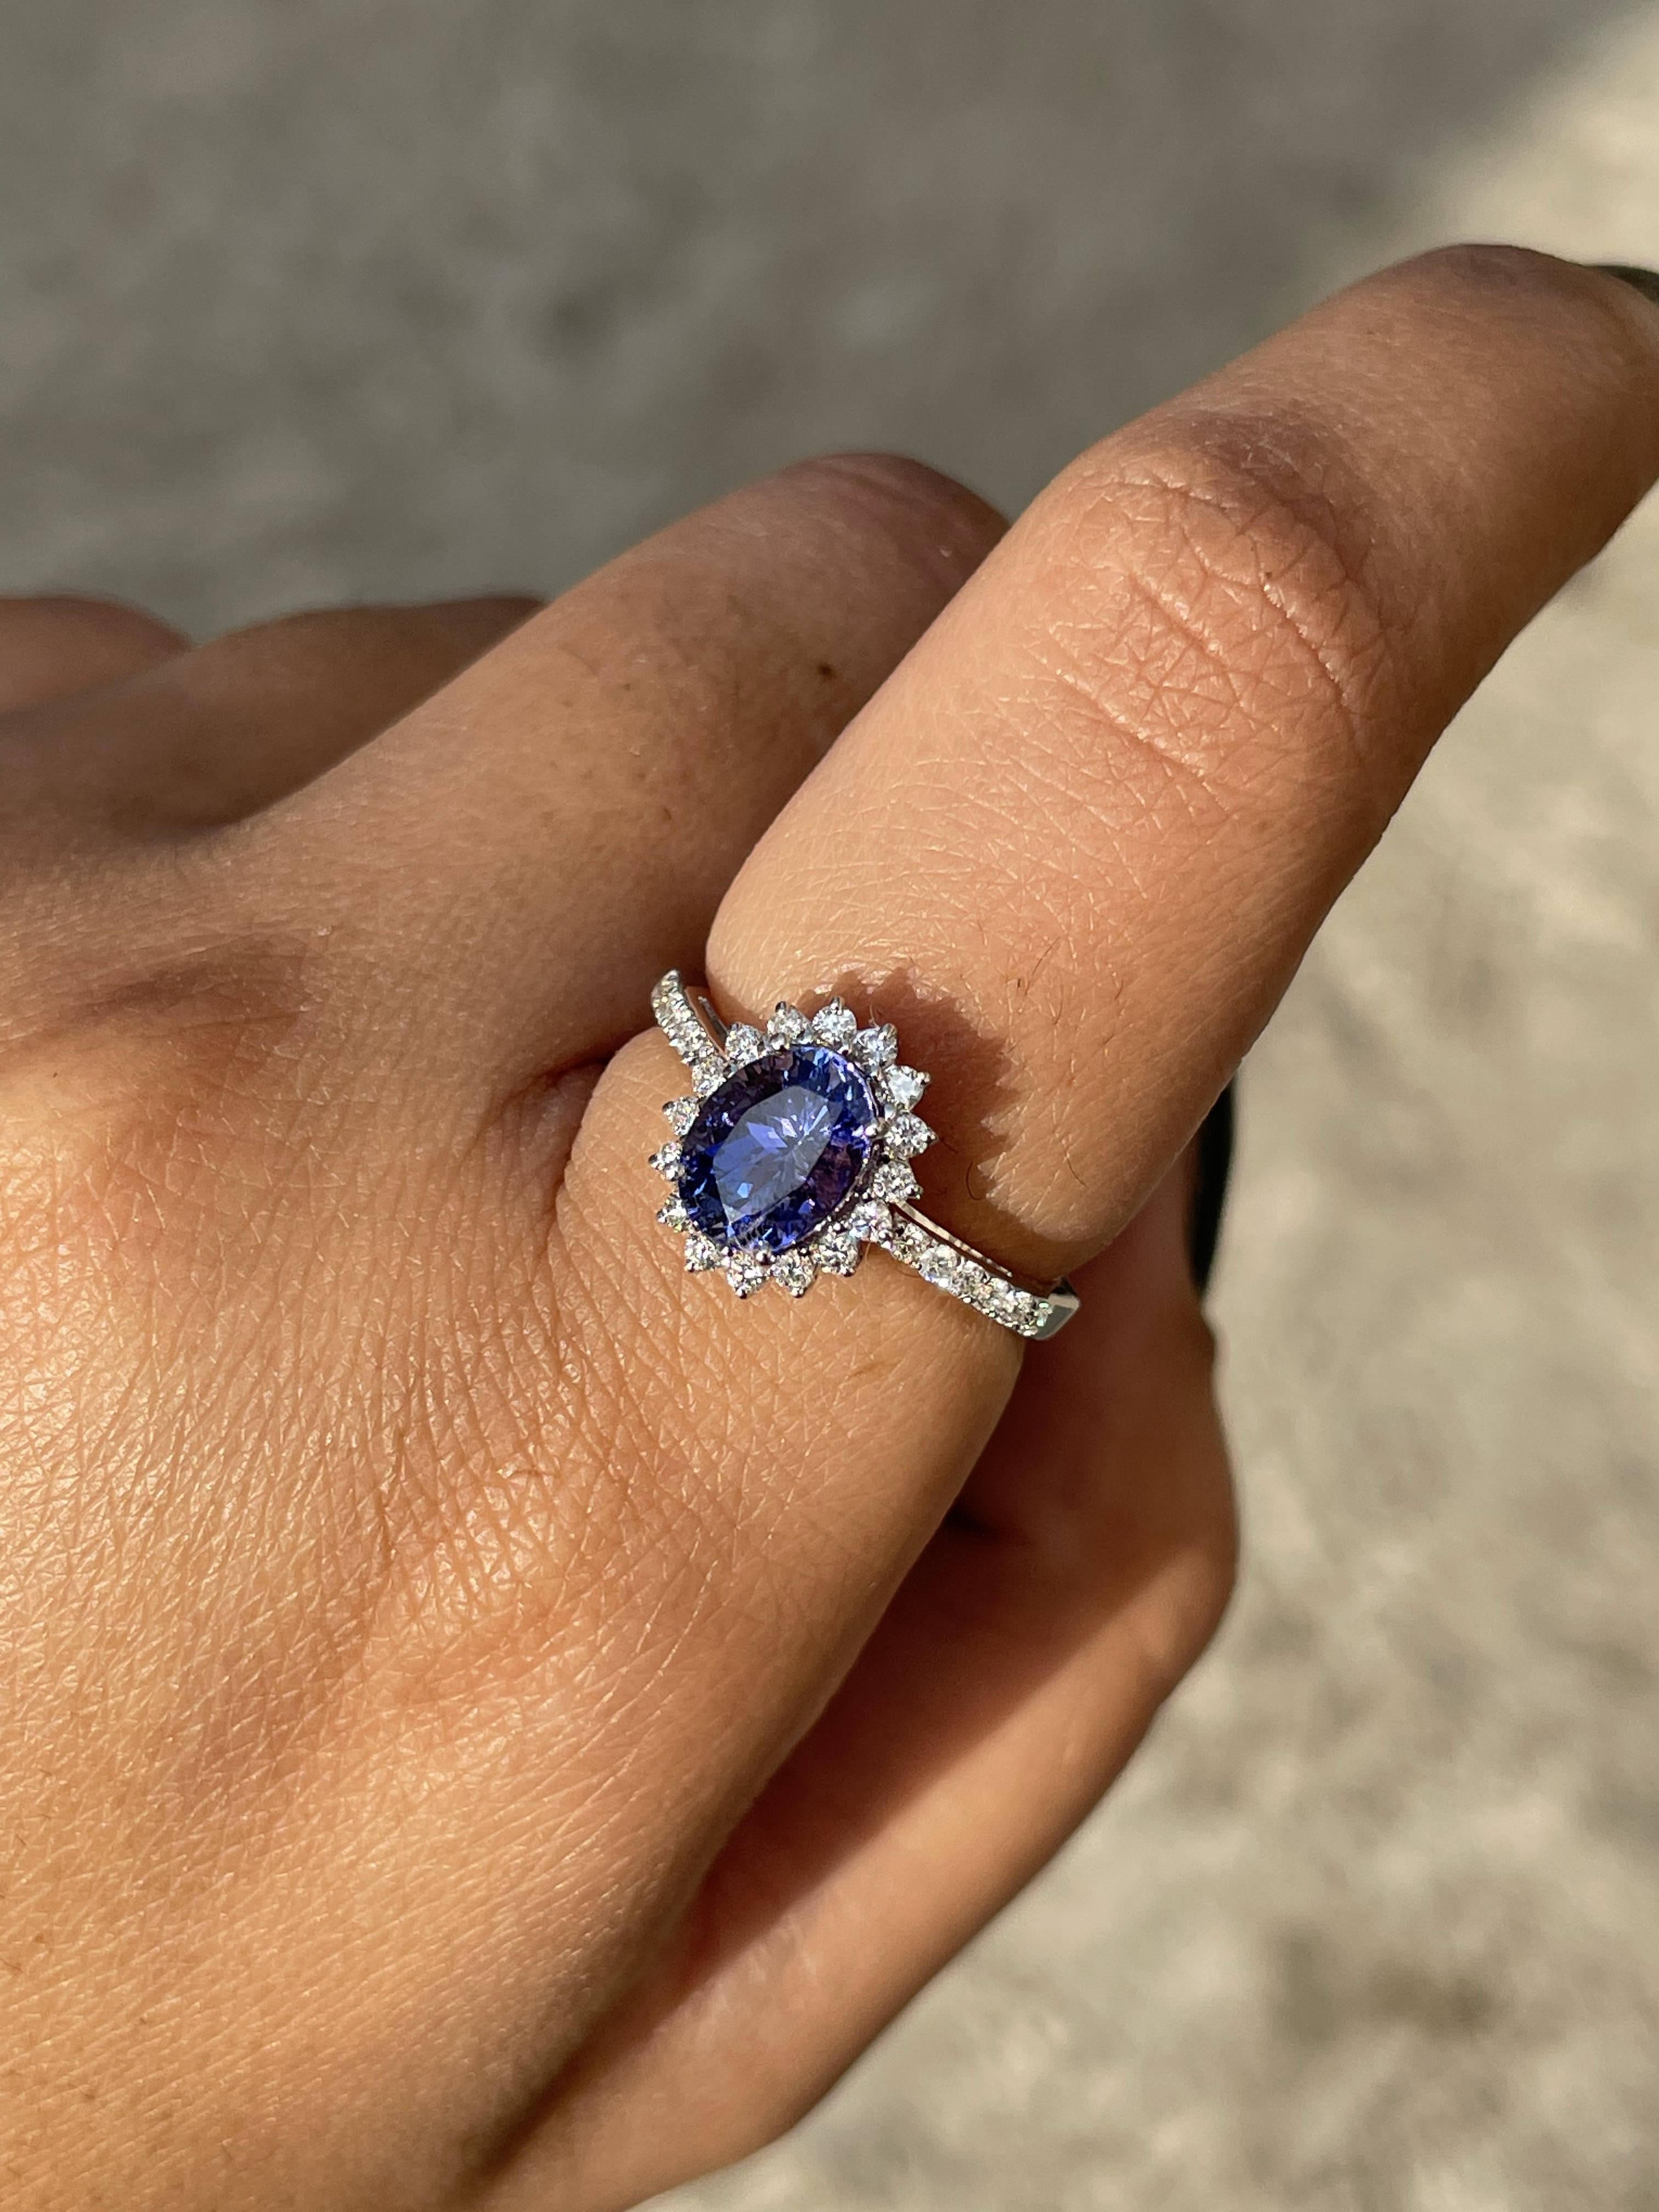 For Sale:  1.59 Carat Natural Tanzanite and Diamond Ring in 18k Solid White Gold 8